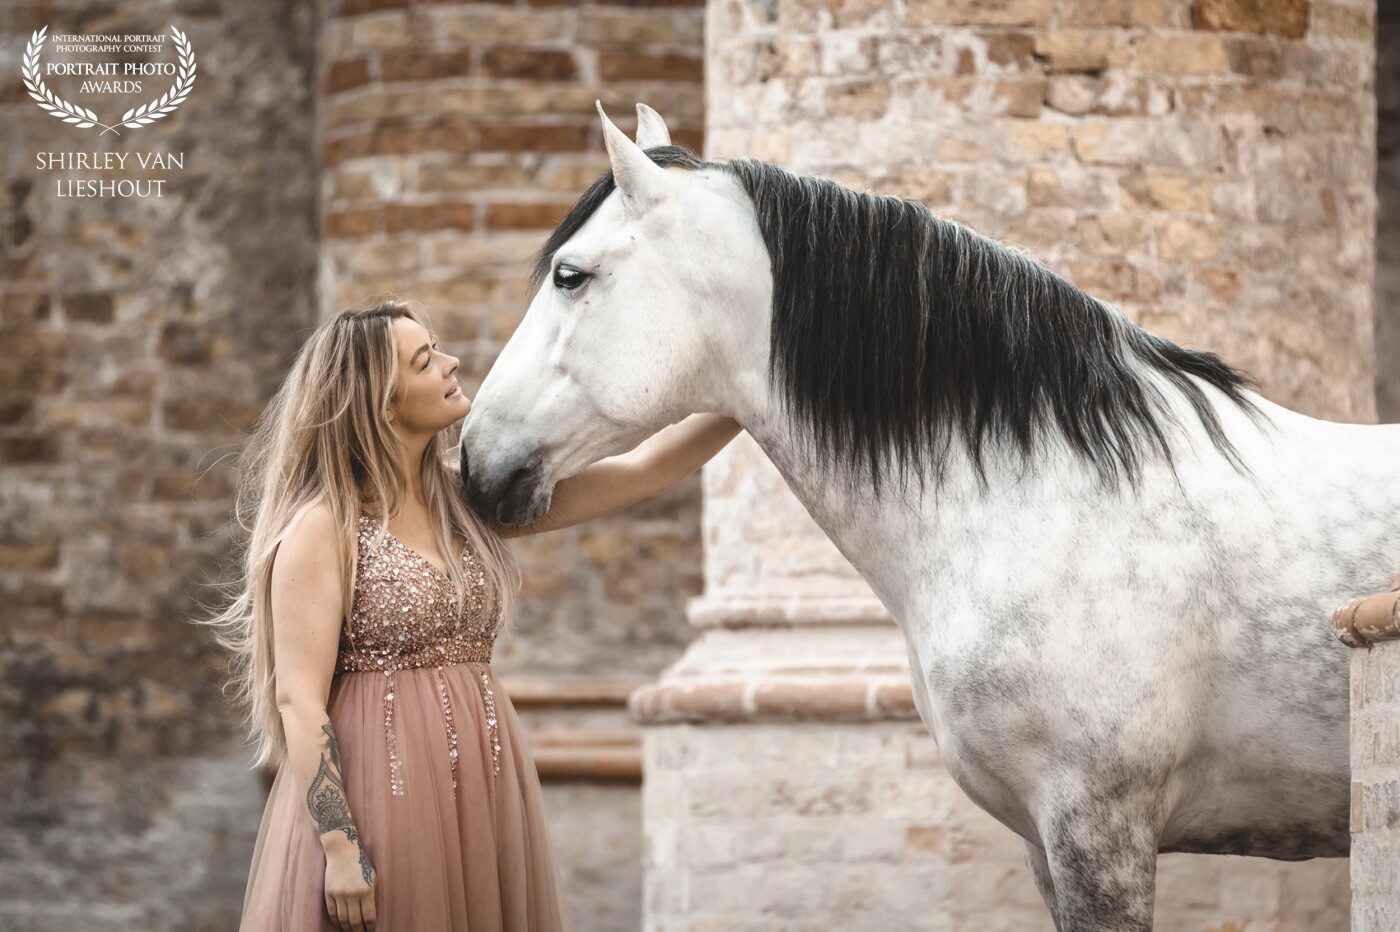 What a lovely couple they are together: Eline with her Andalusian stallion Trajé. This photo was taken during a portfolio shoot in a beautiful old church (Broerekerk) in Bolsward the Netherlands. And although it was very cold she stood there in that beautiful dress.